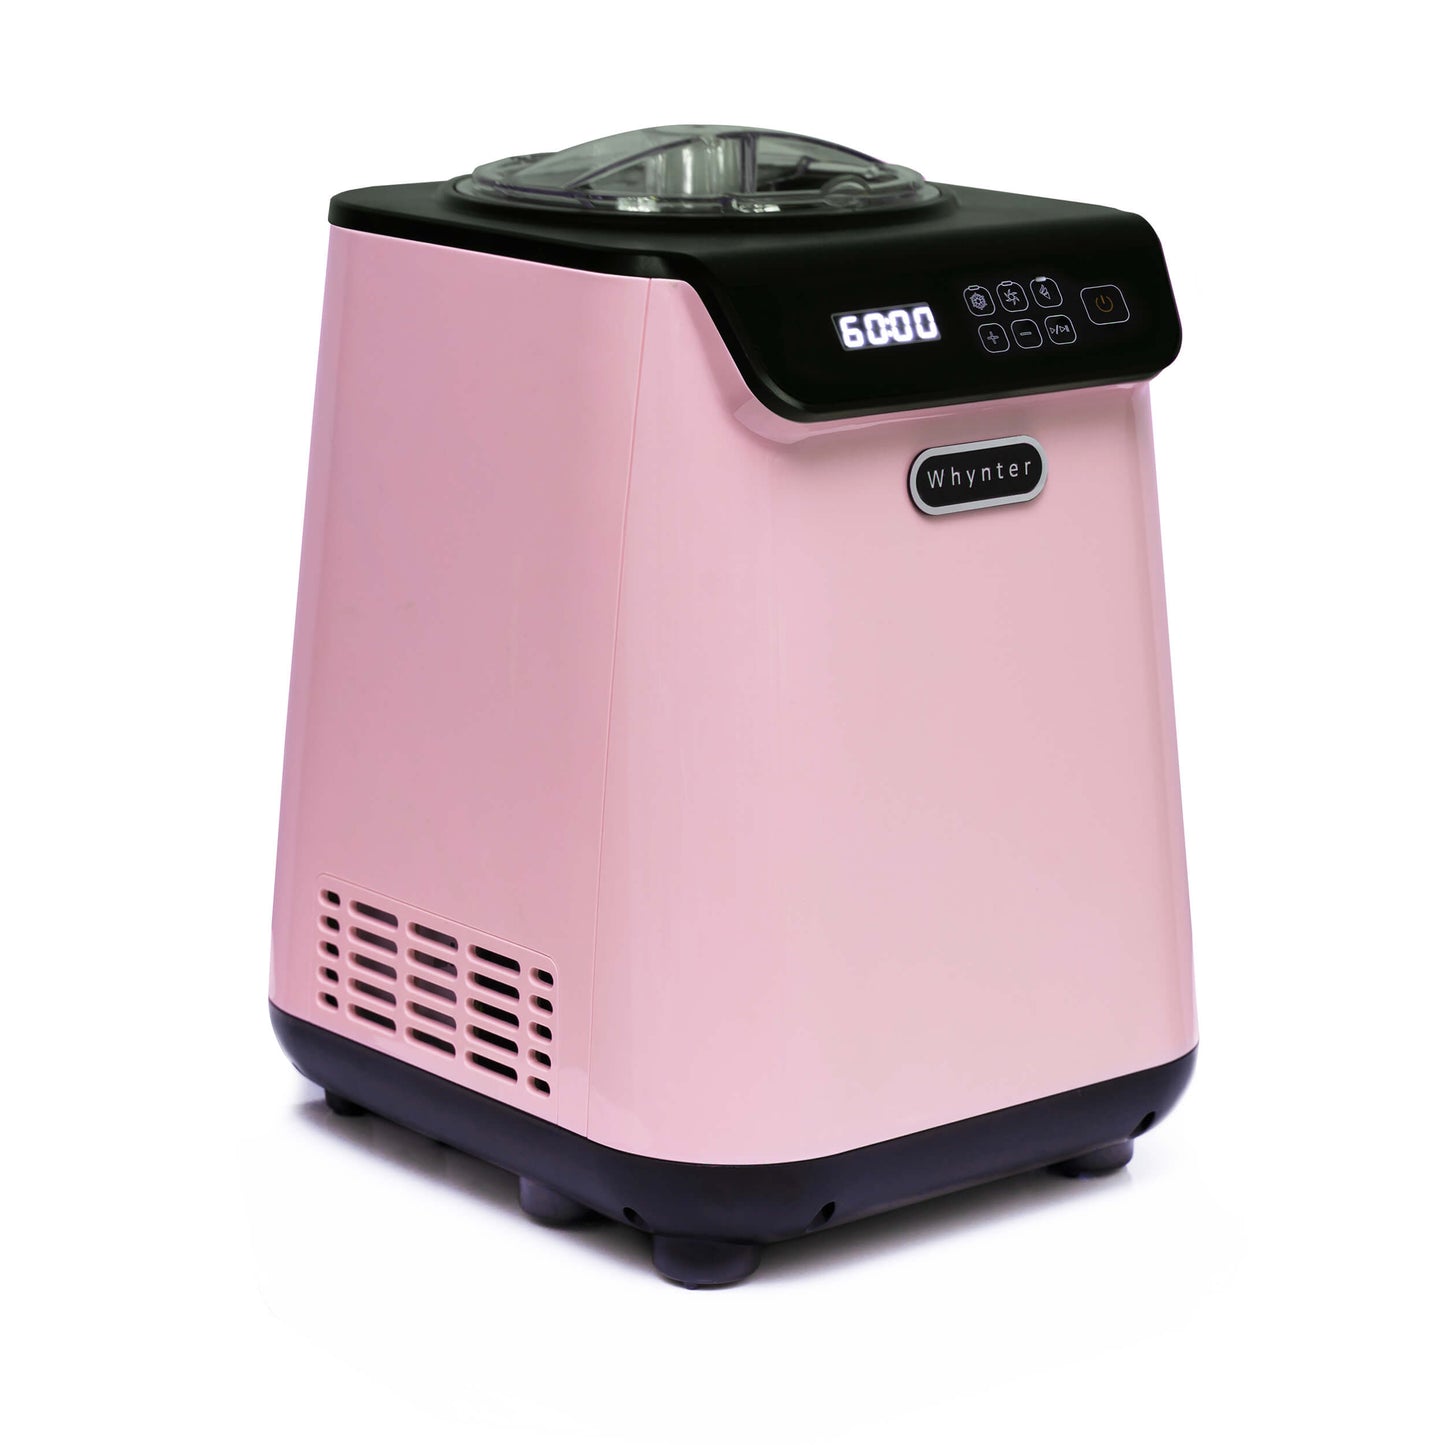 Whynter Ice Cream Makers Whynter ICM-128BPS 1.28 Quart Capacity Compact Upright Automatic Compressor Ice Cream Maker with Stainless Steel Bowl Limited Black Pink Edition